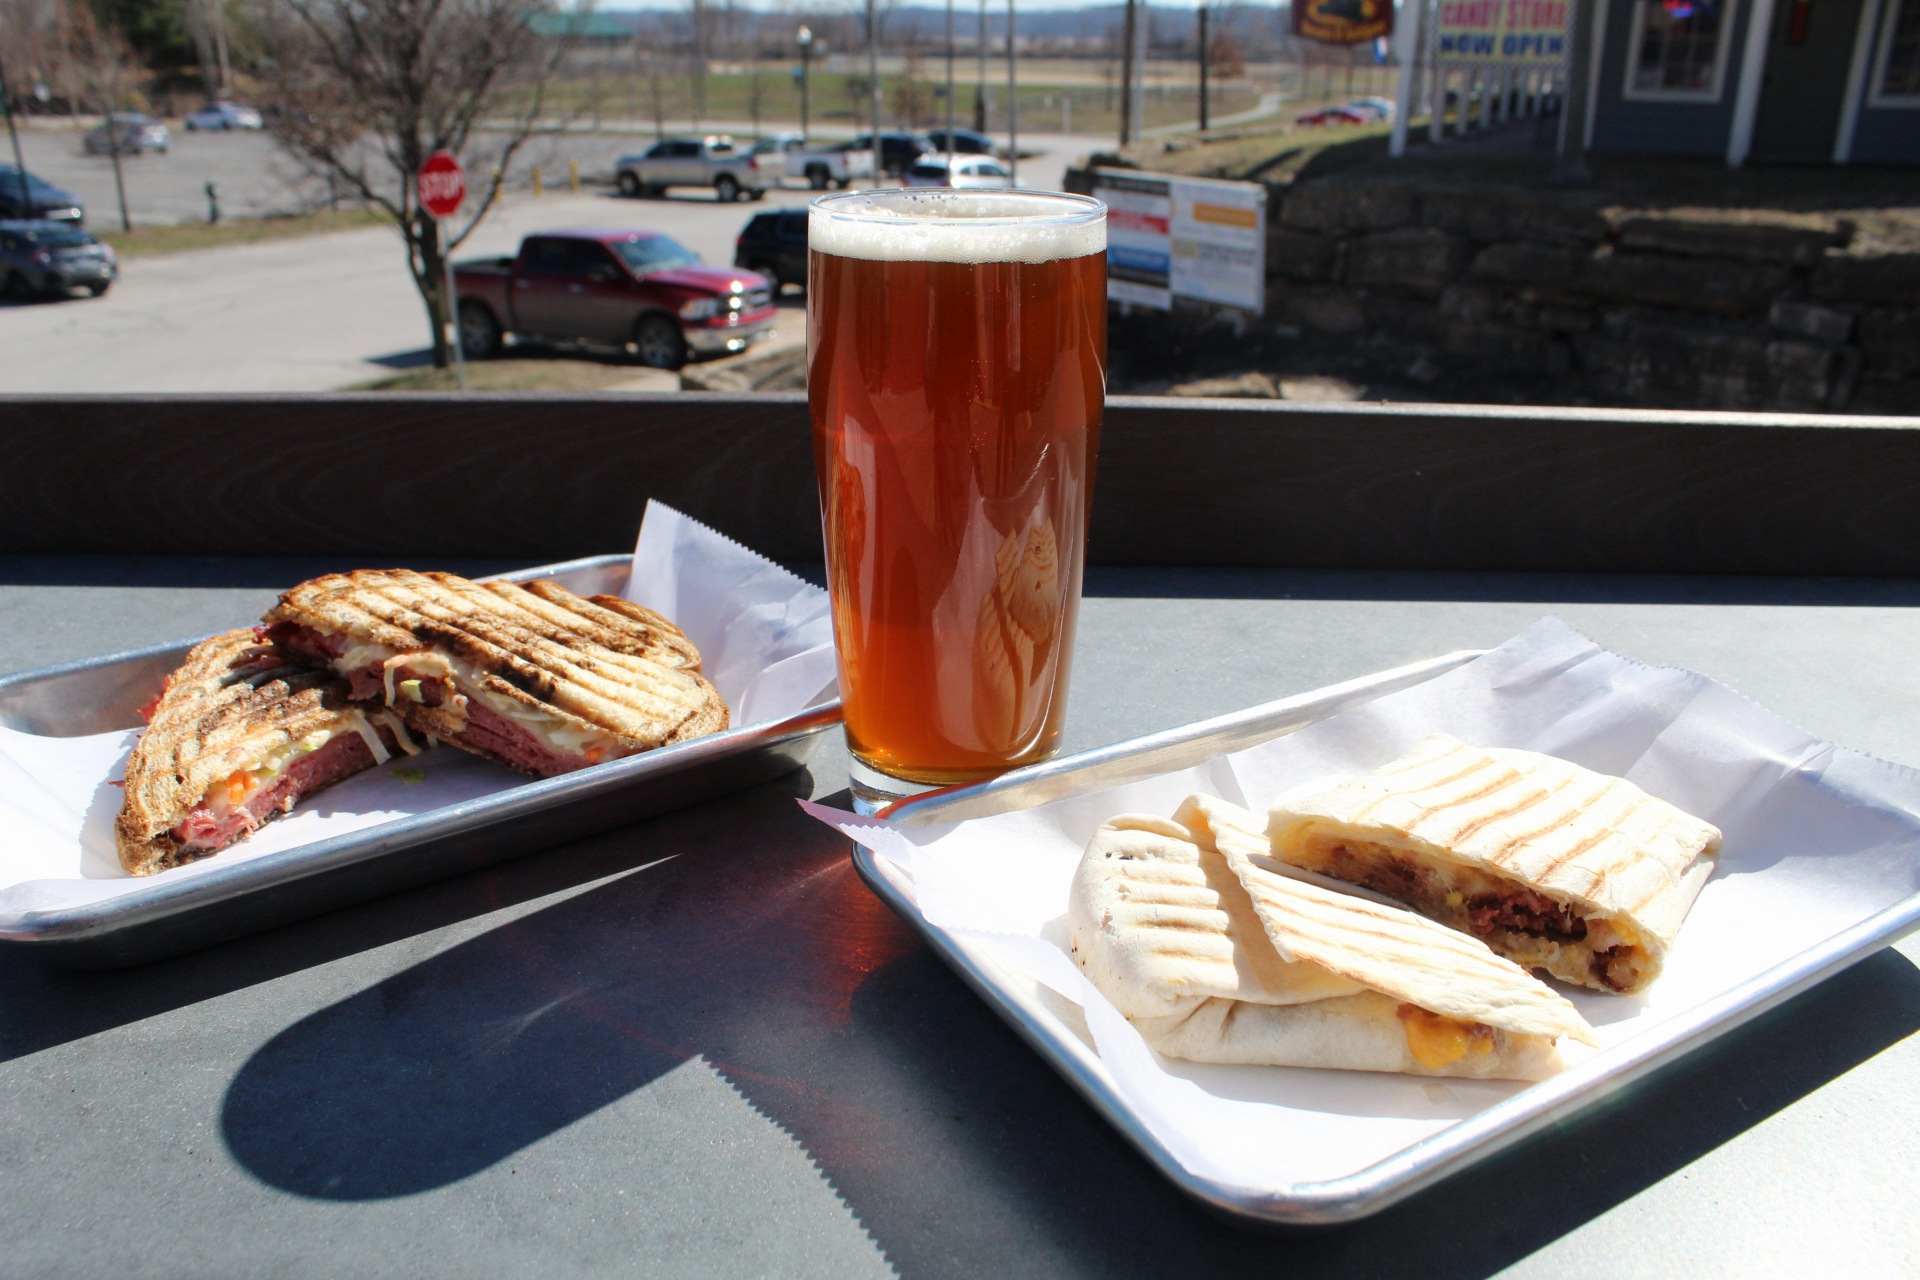 Irish Red Ale on table with Reuben Sandwich and Breakfast Burrito